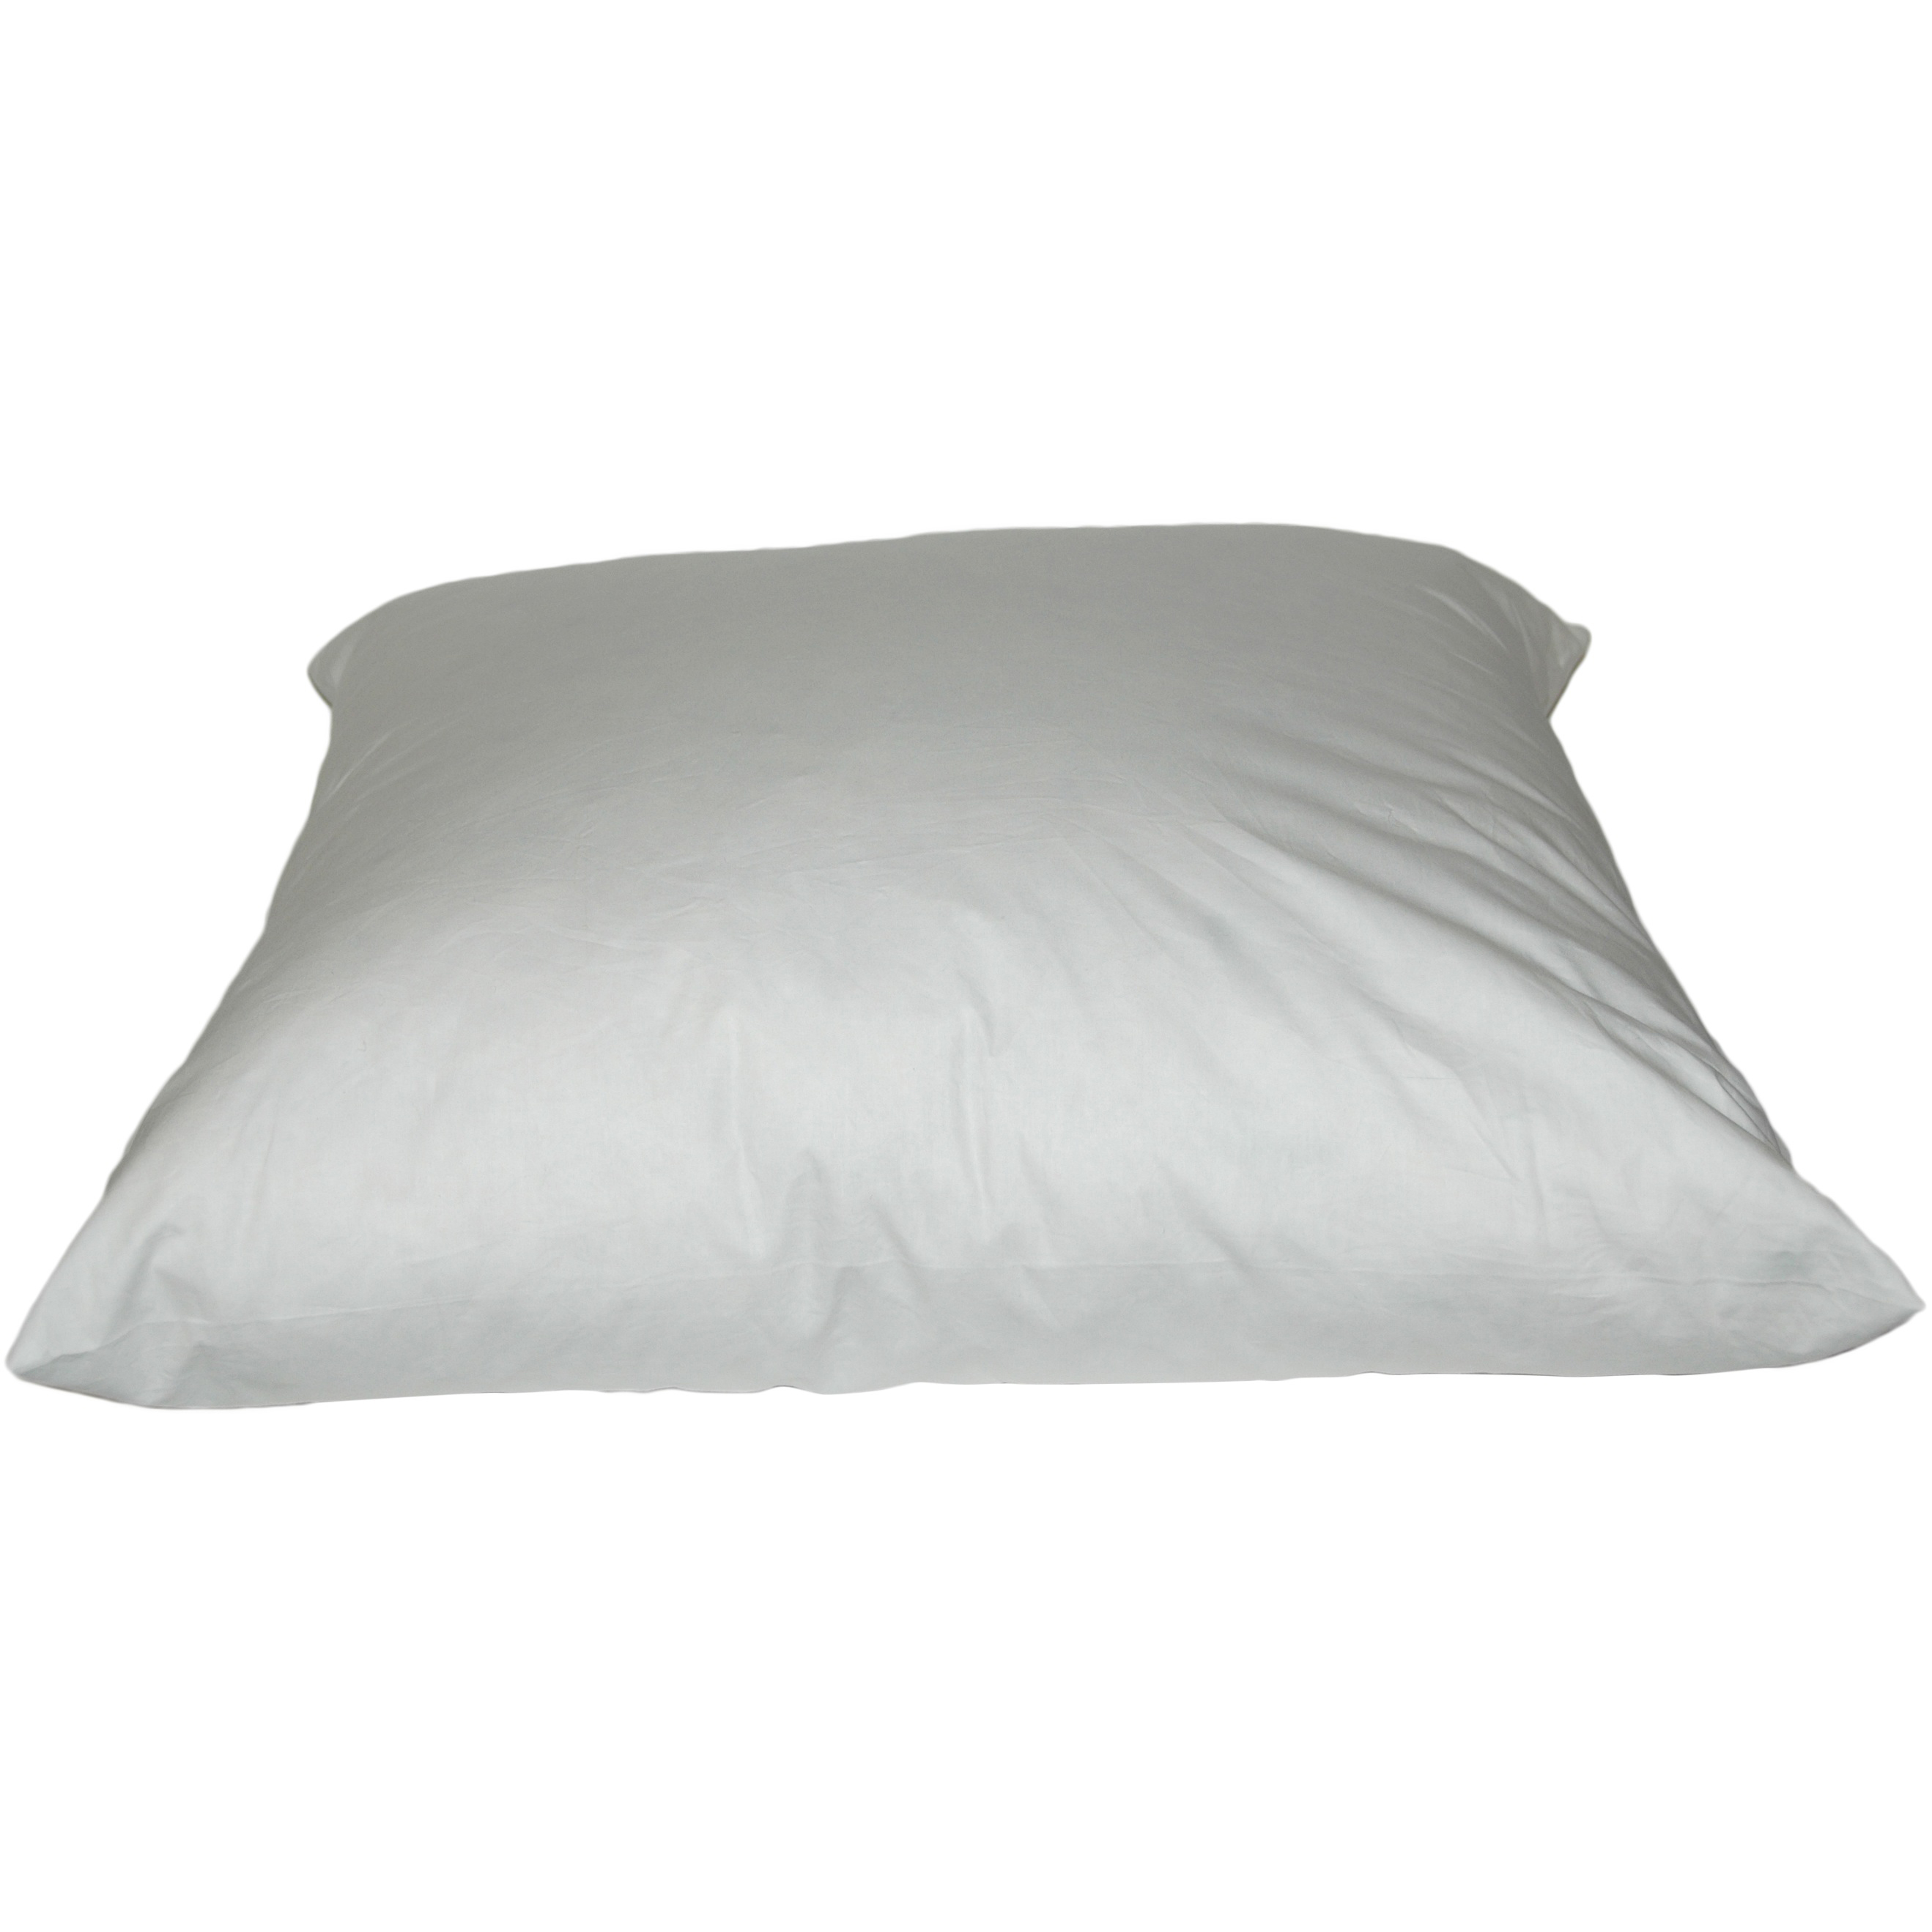 Down & Feather Pillows 25/75 Blend 30 inch